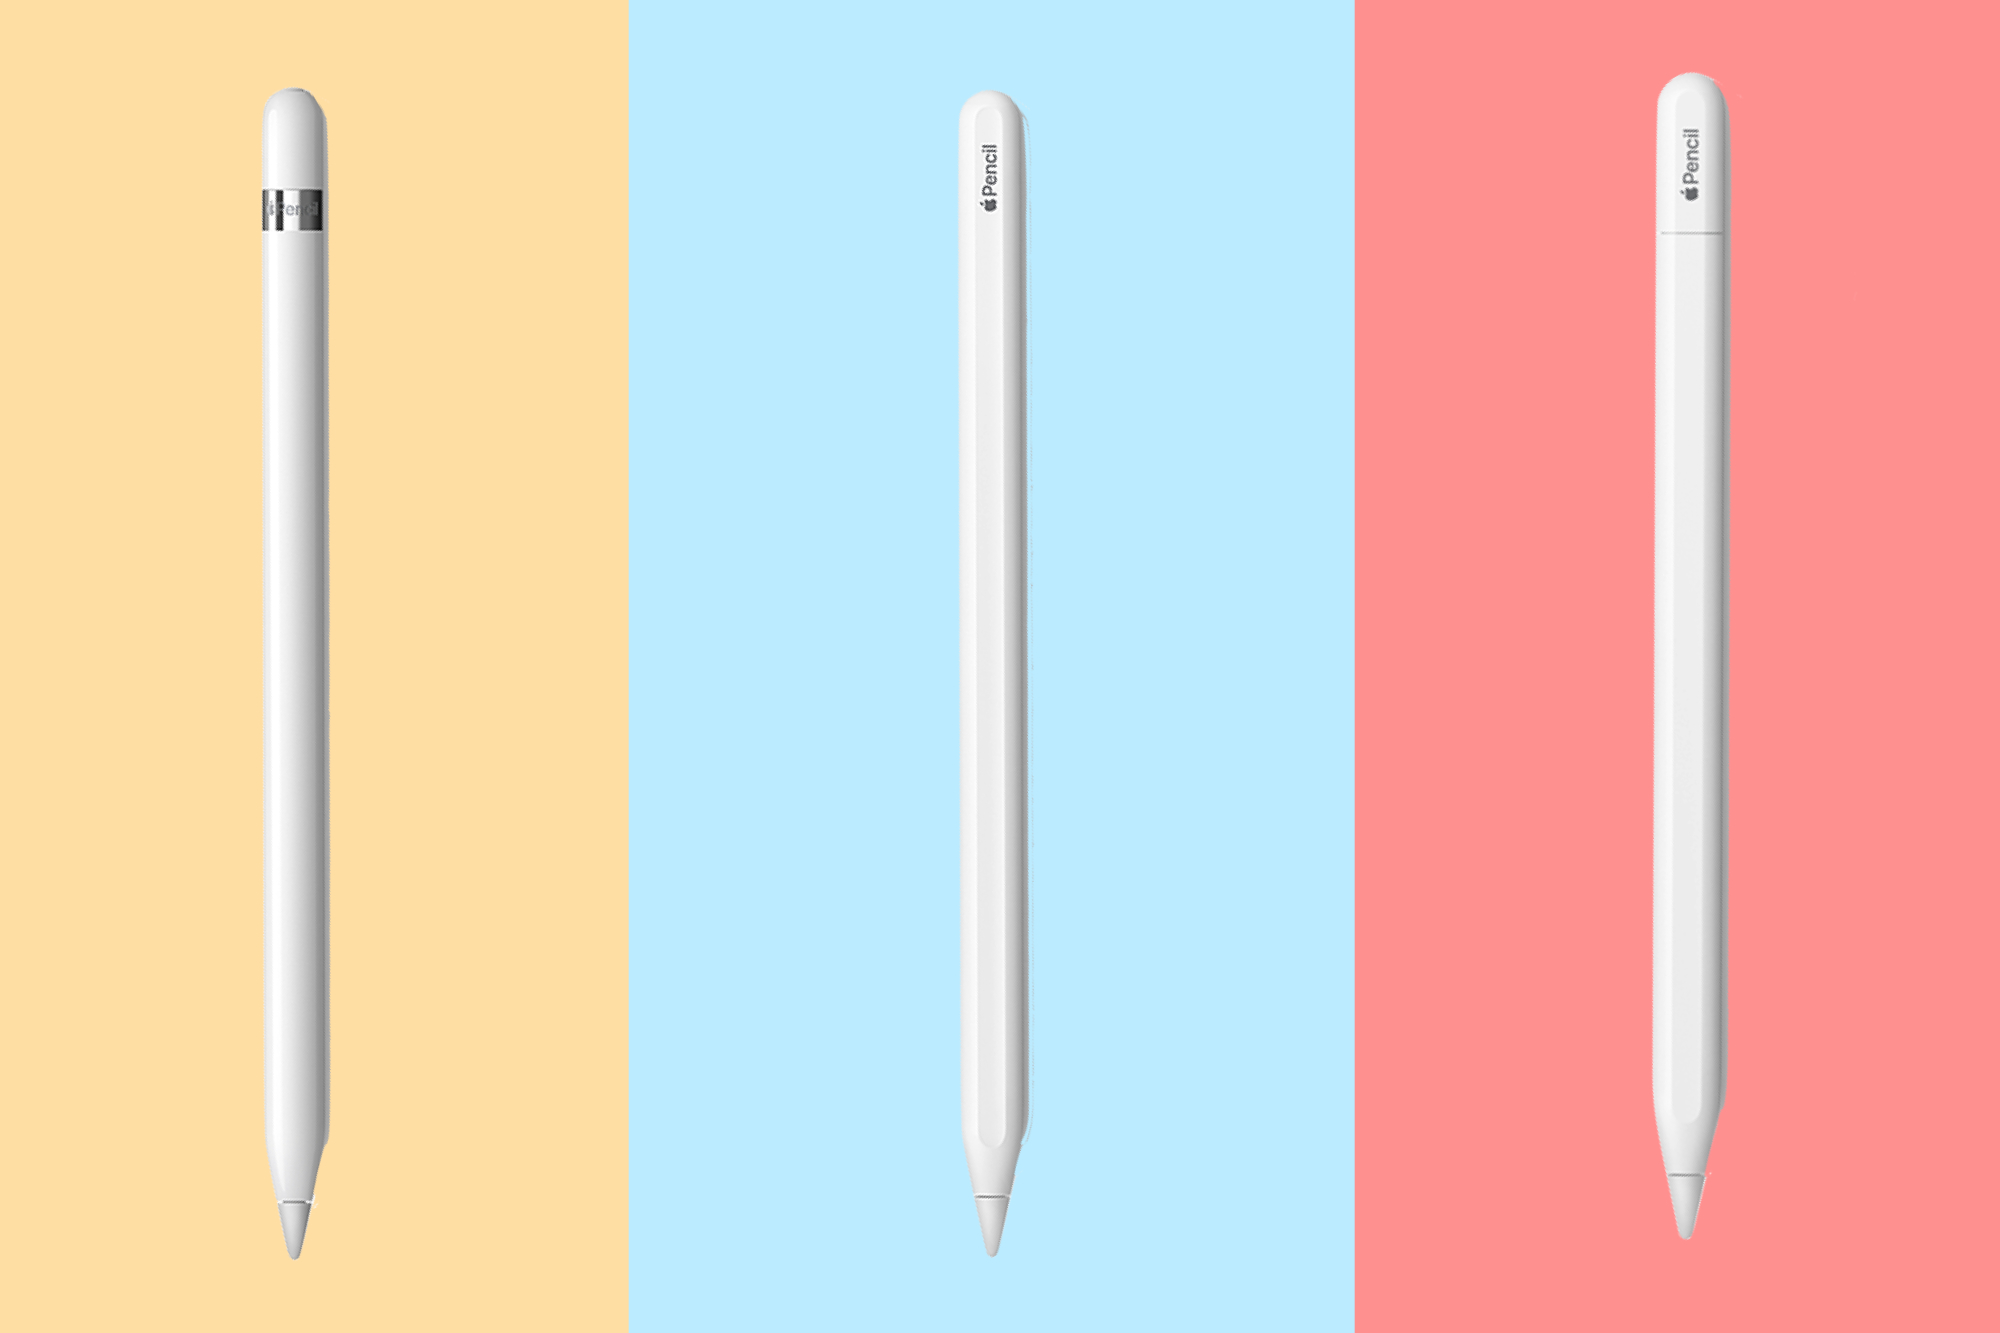 How to choose the right Apple Pencil for your iPad: A comparison